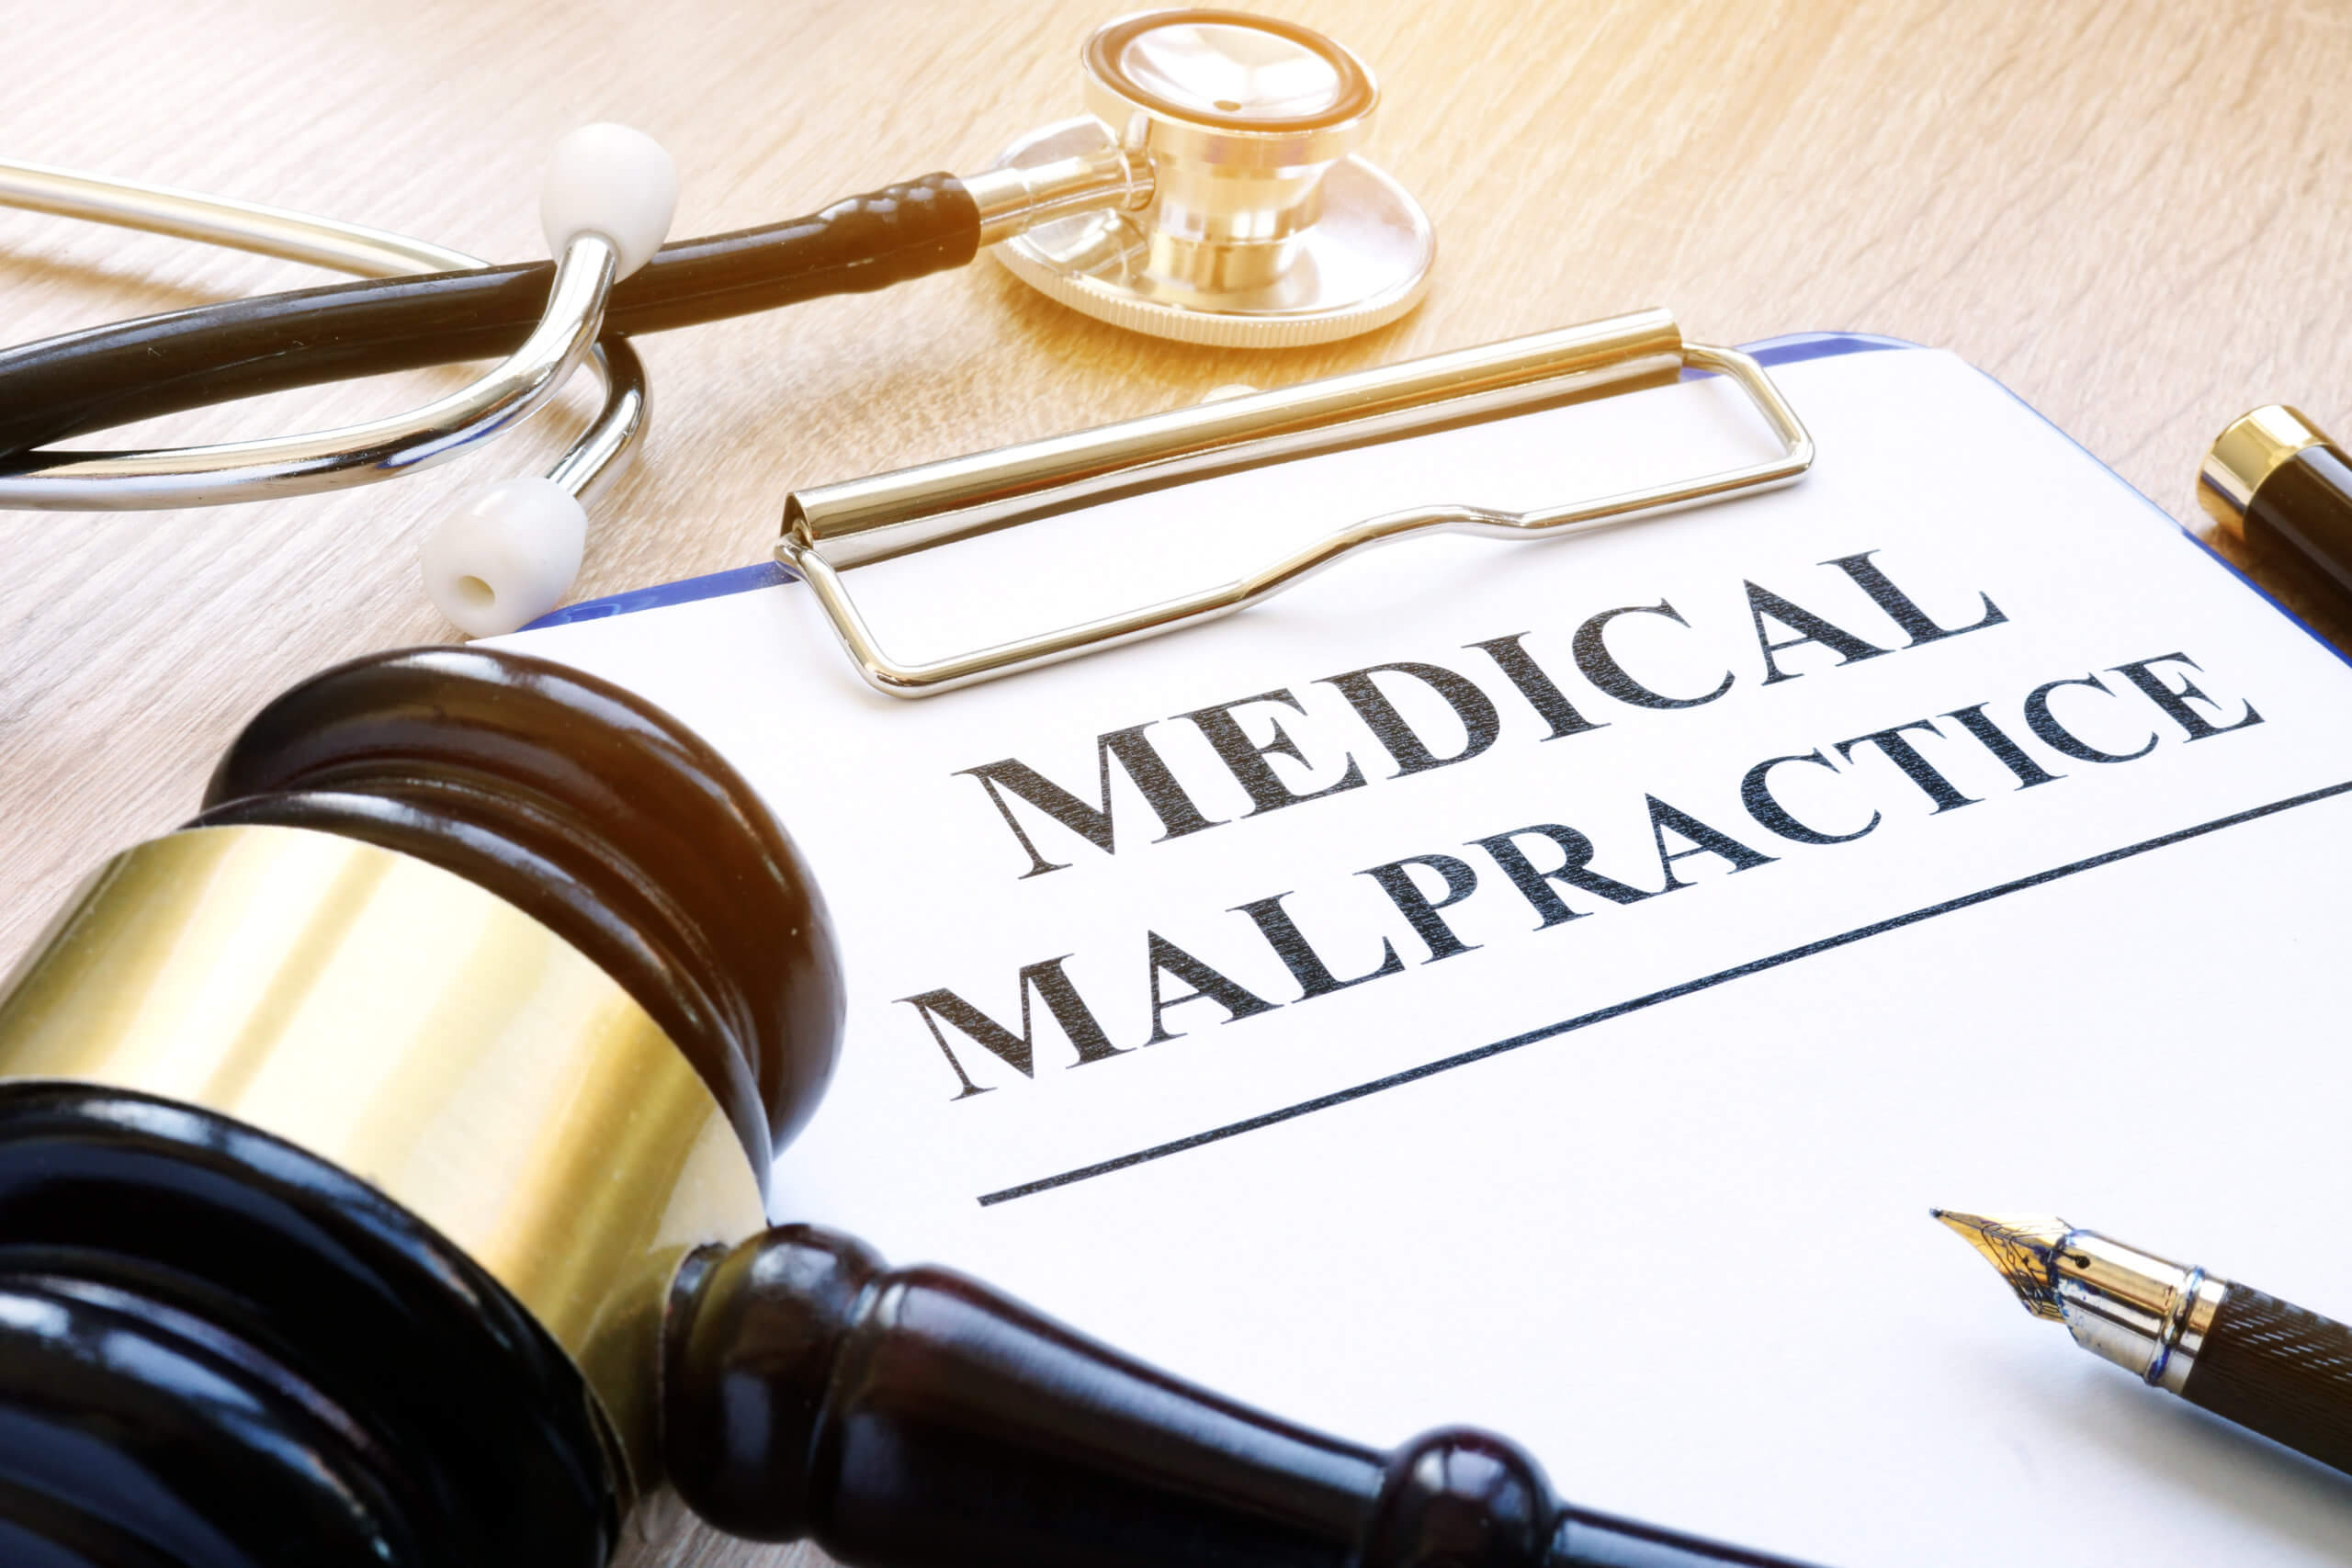 What are some Common Examples of Medical Malpractice?